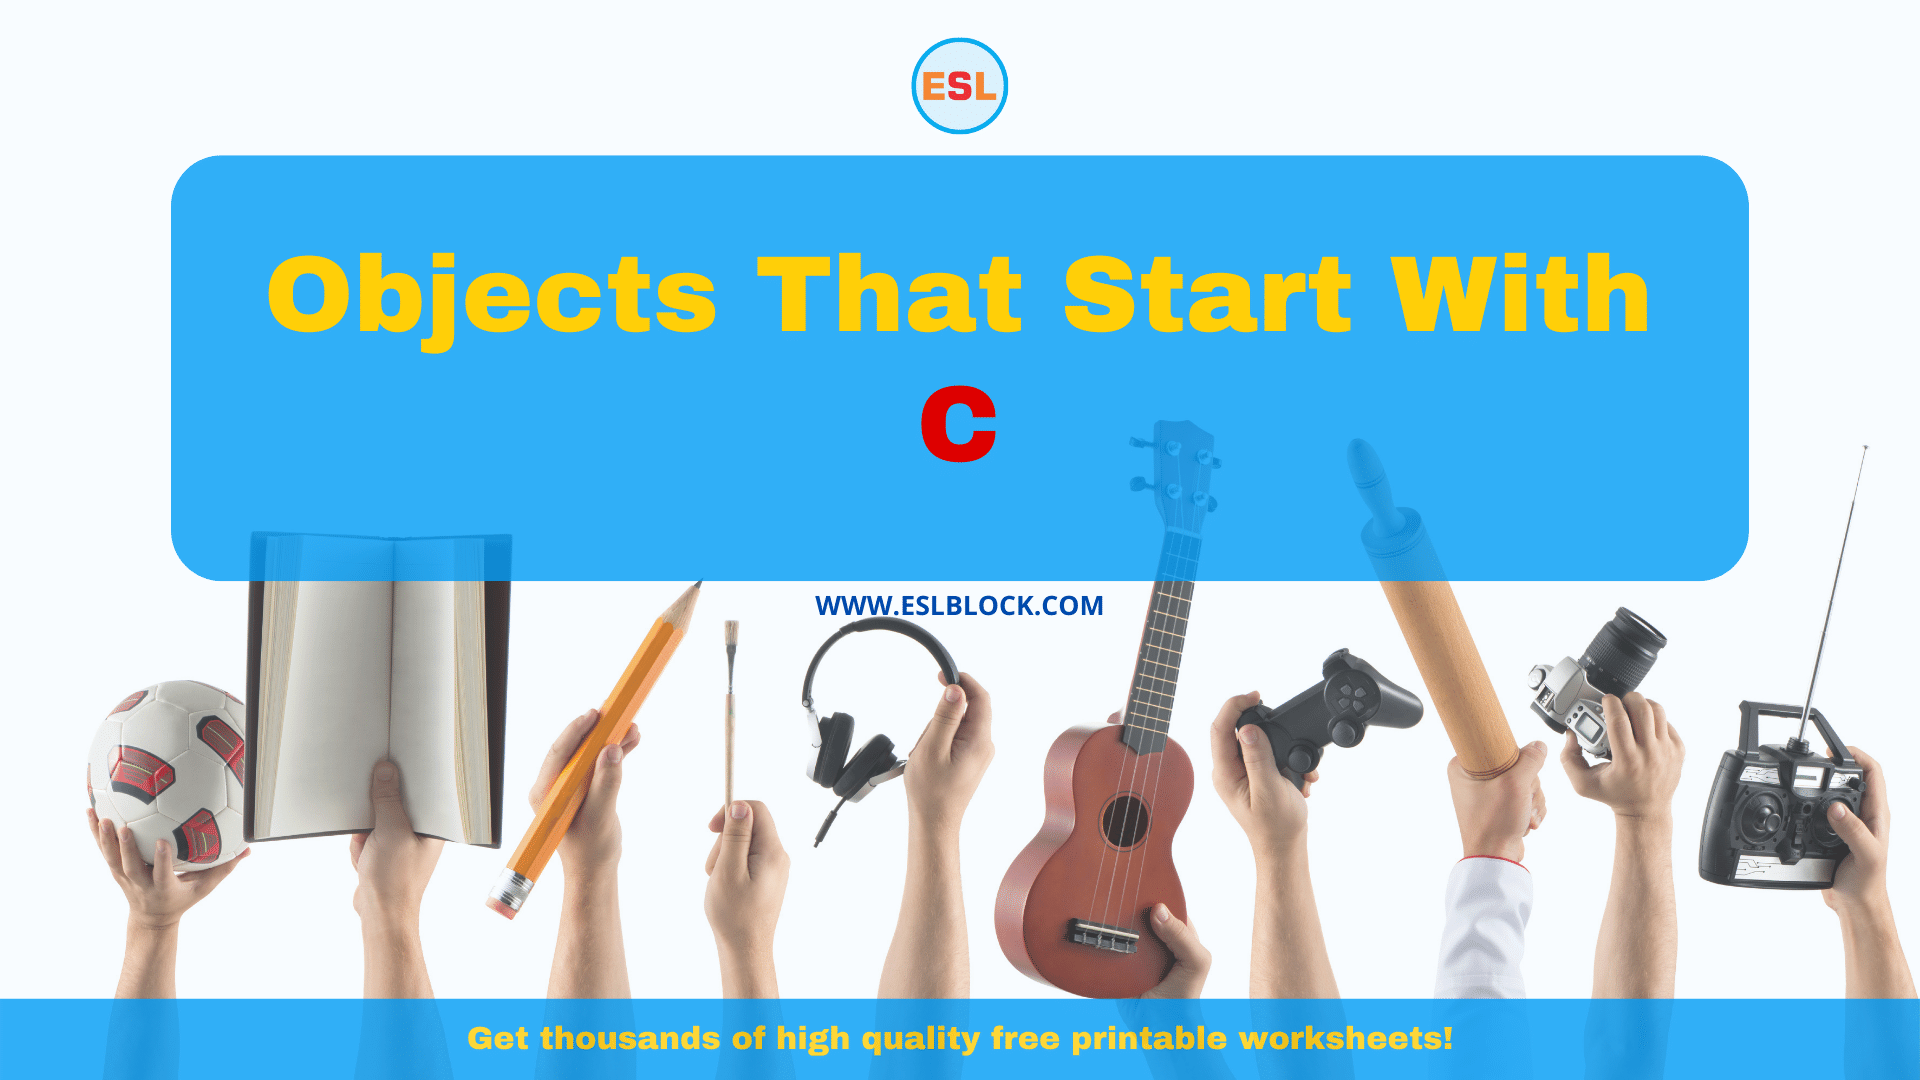 5 Letter Objects Starting With C, C Objects, C Objects in English, C Objects Names, English, English Nouns, English Vocabulary, English Words, List of Objects That Start With ZZ, Nouns, Objects List, Objects That Start With C, Things Names, Vocabulary